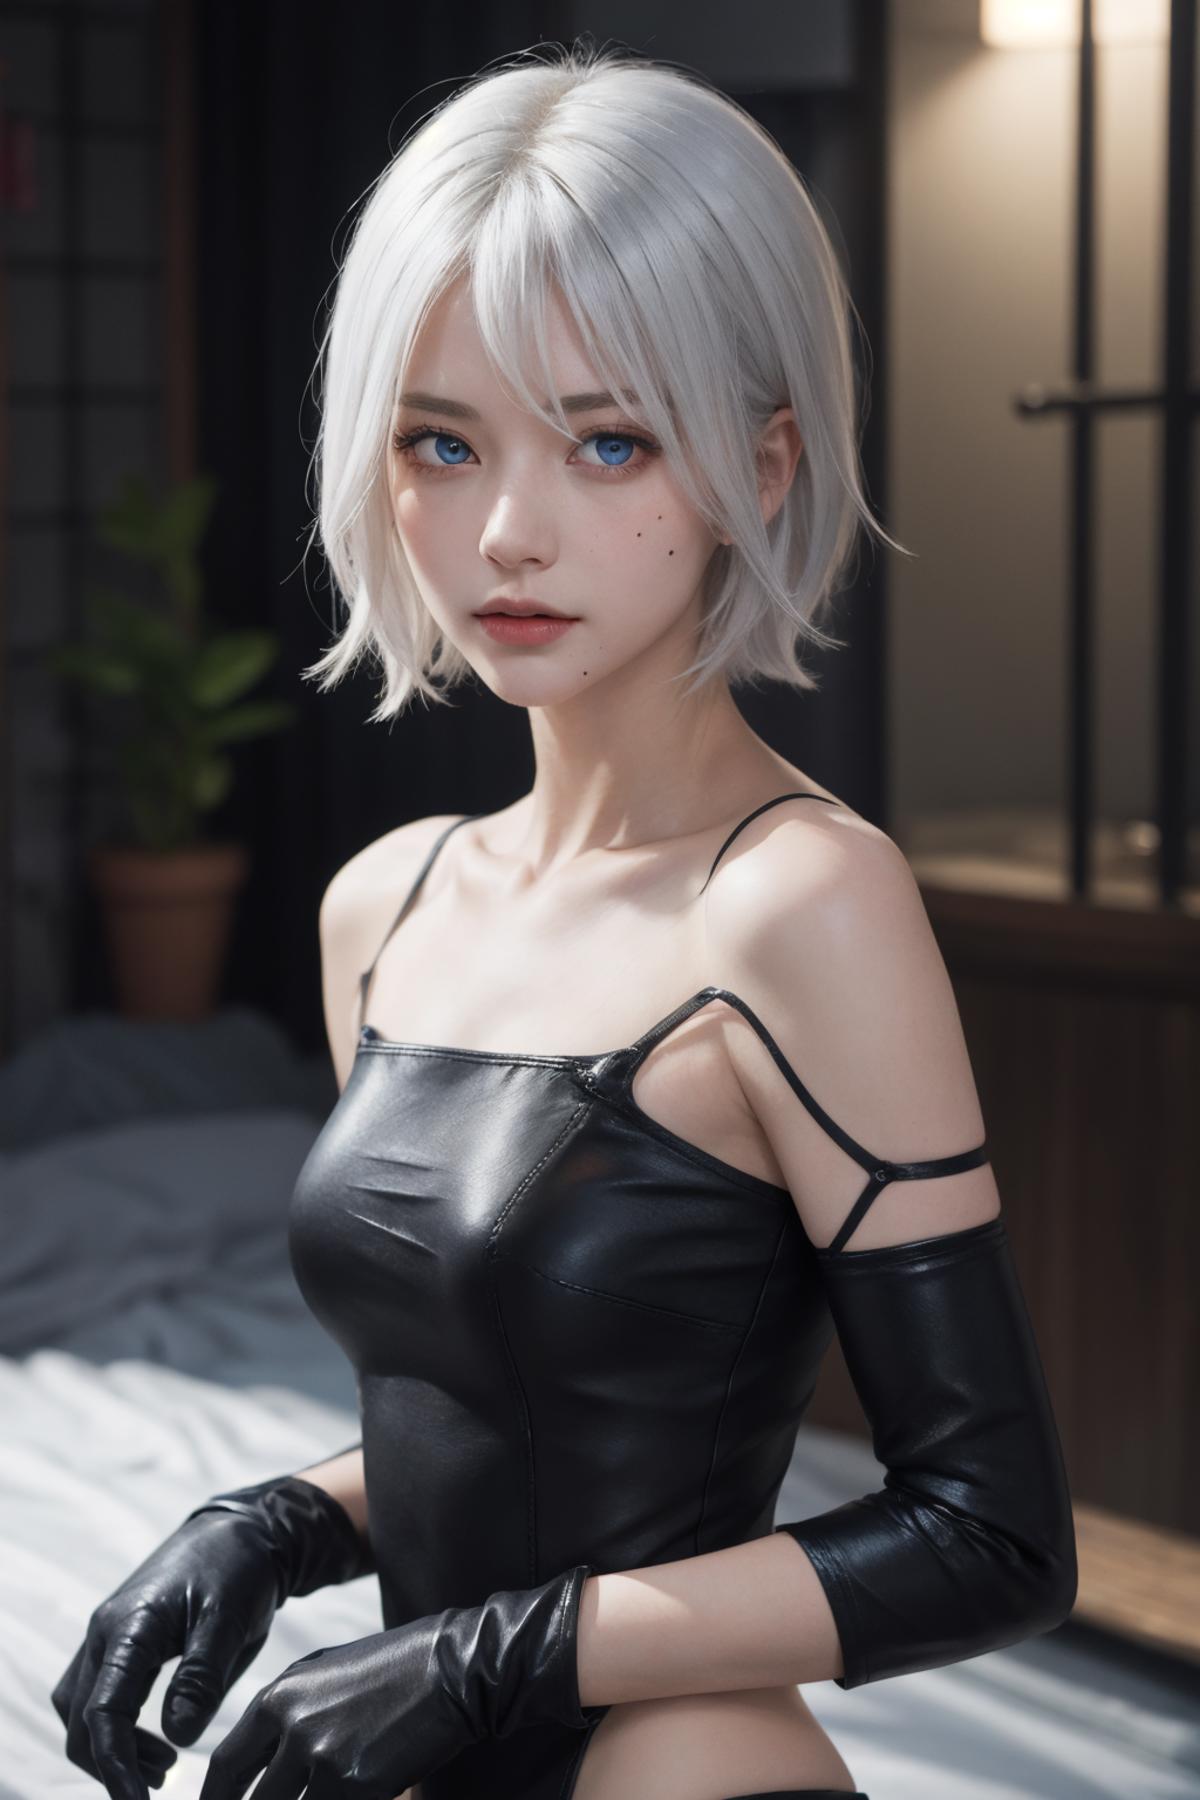 A2 (Yorha Type A no. 2) + Realistic | Goofy Ai image by marshall424